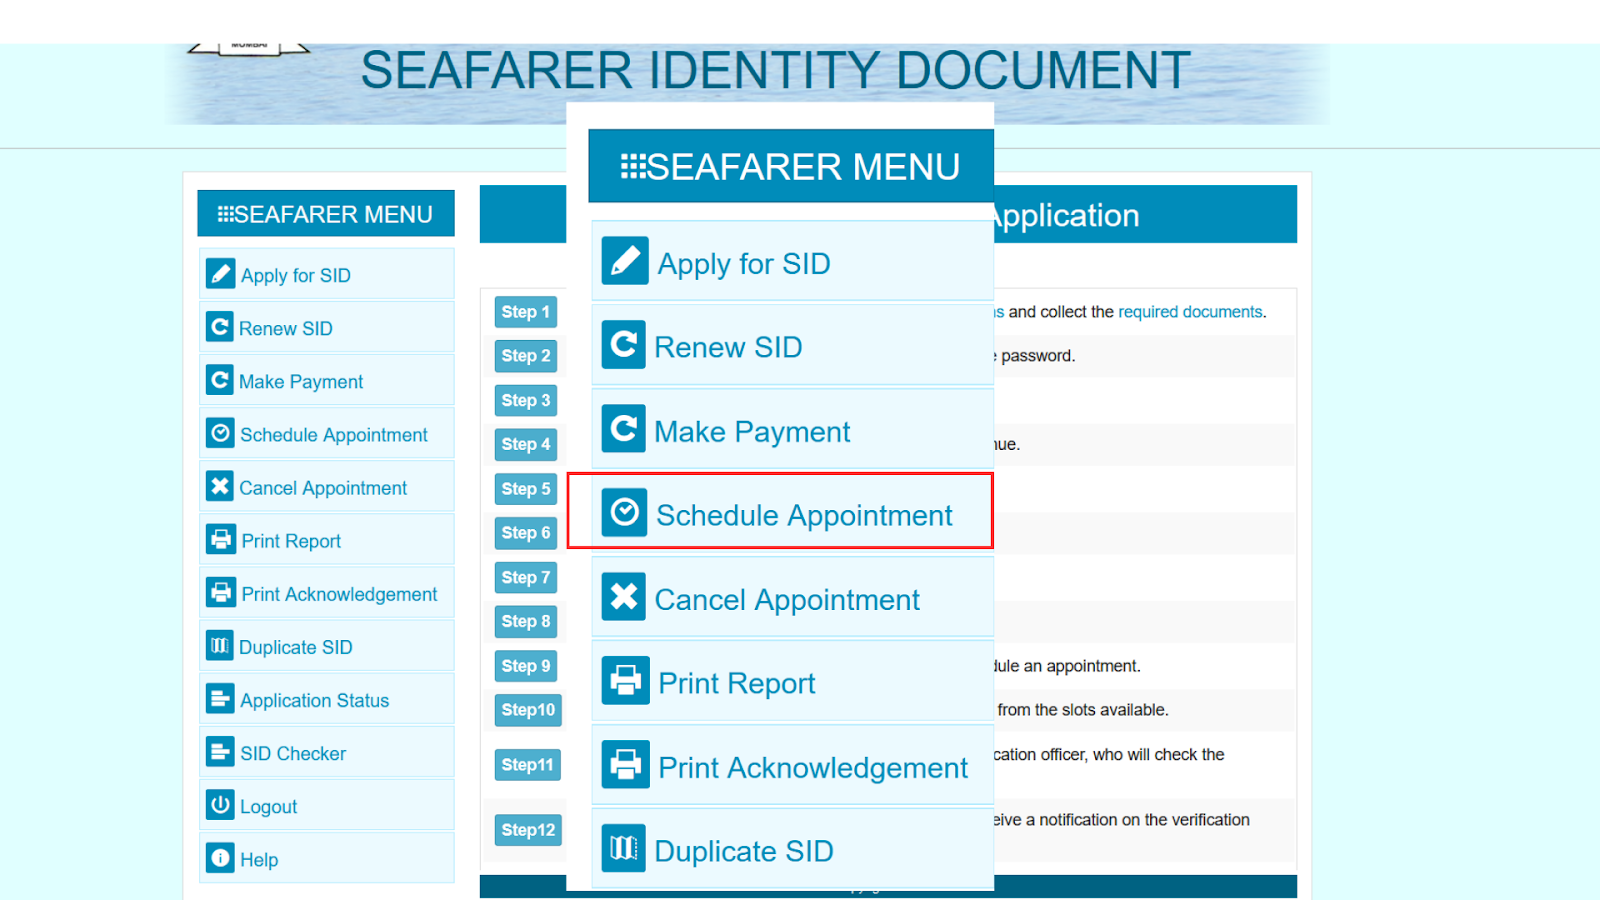 How to apply for Seafarer's identity document 